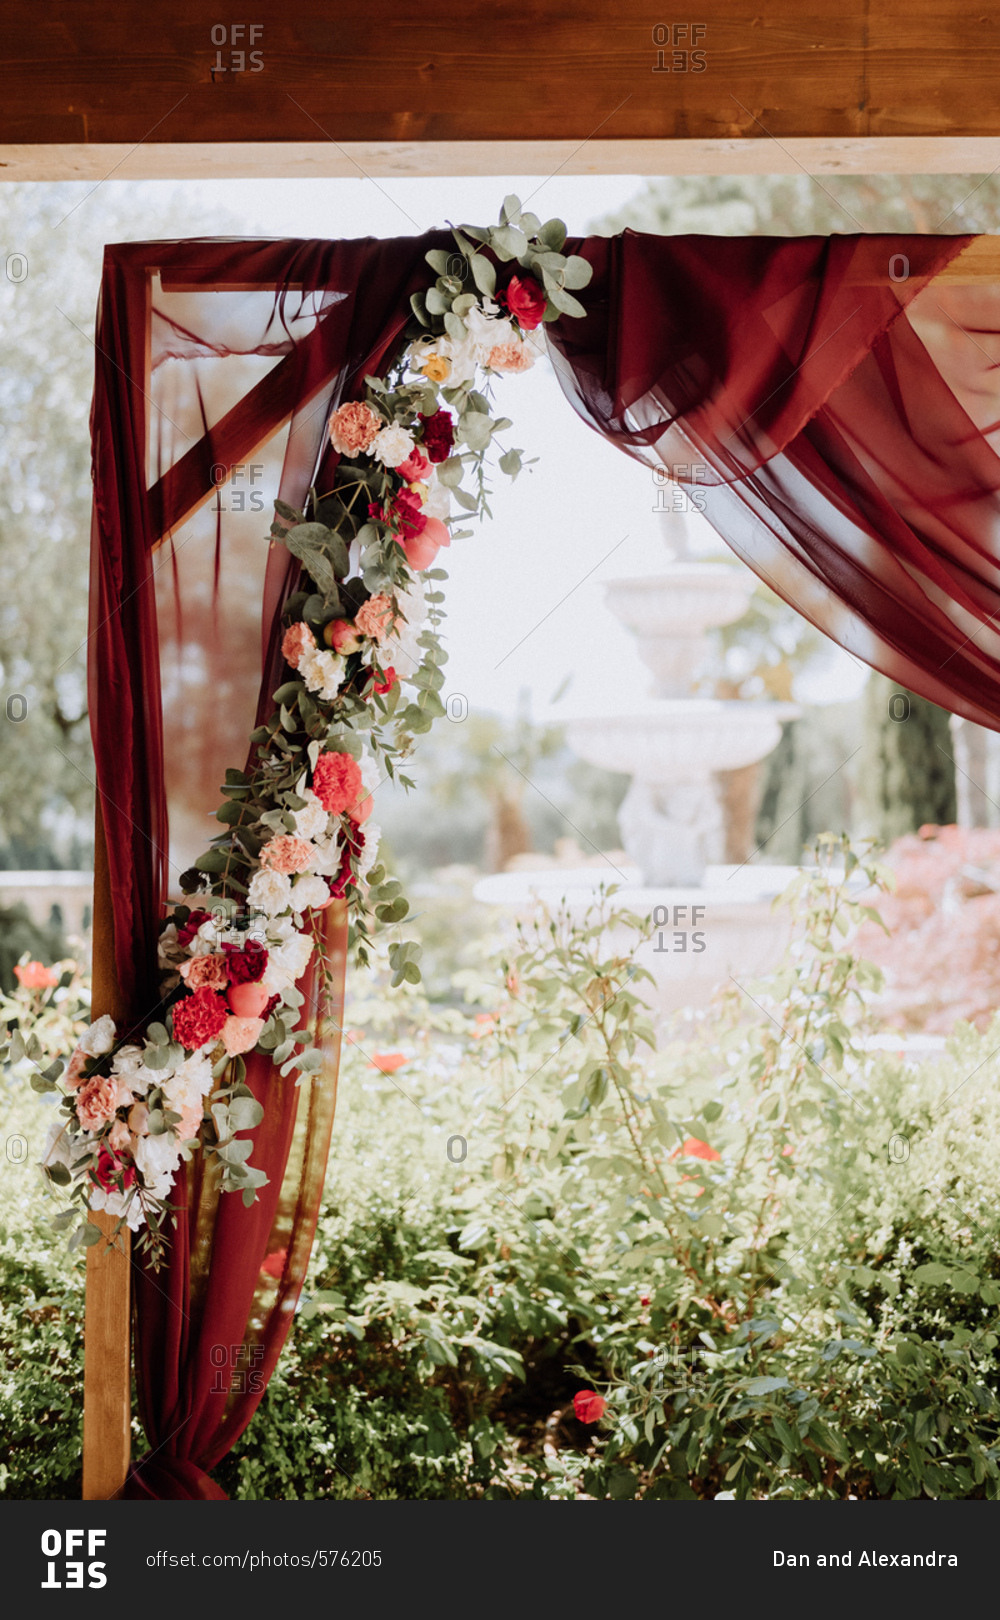 Wedding arbor with red curtains and flowers